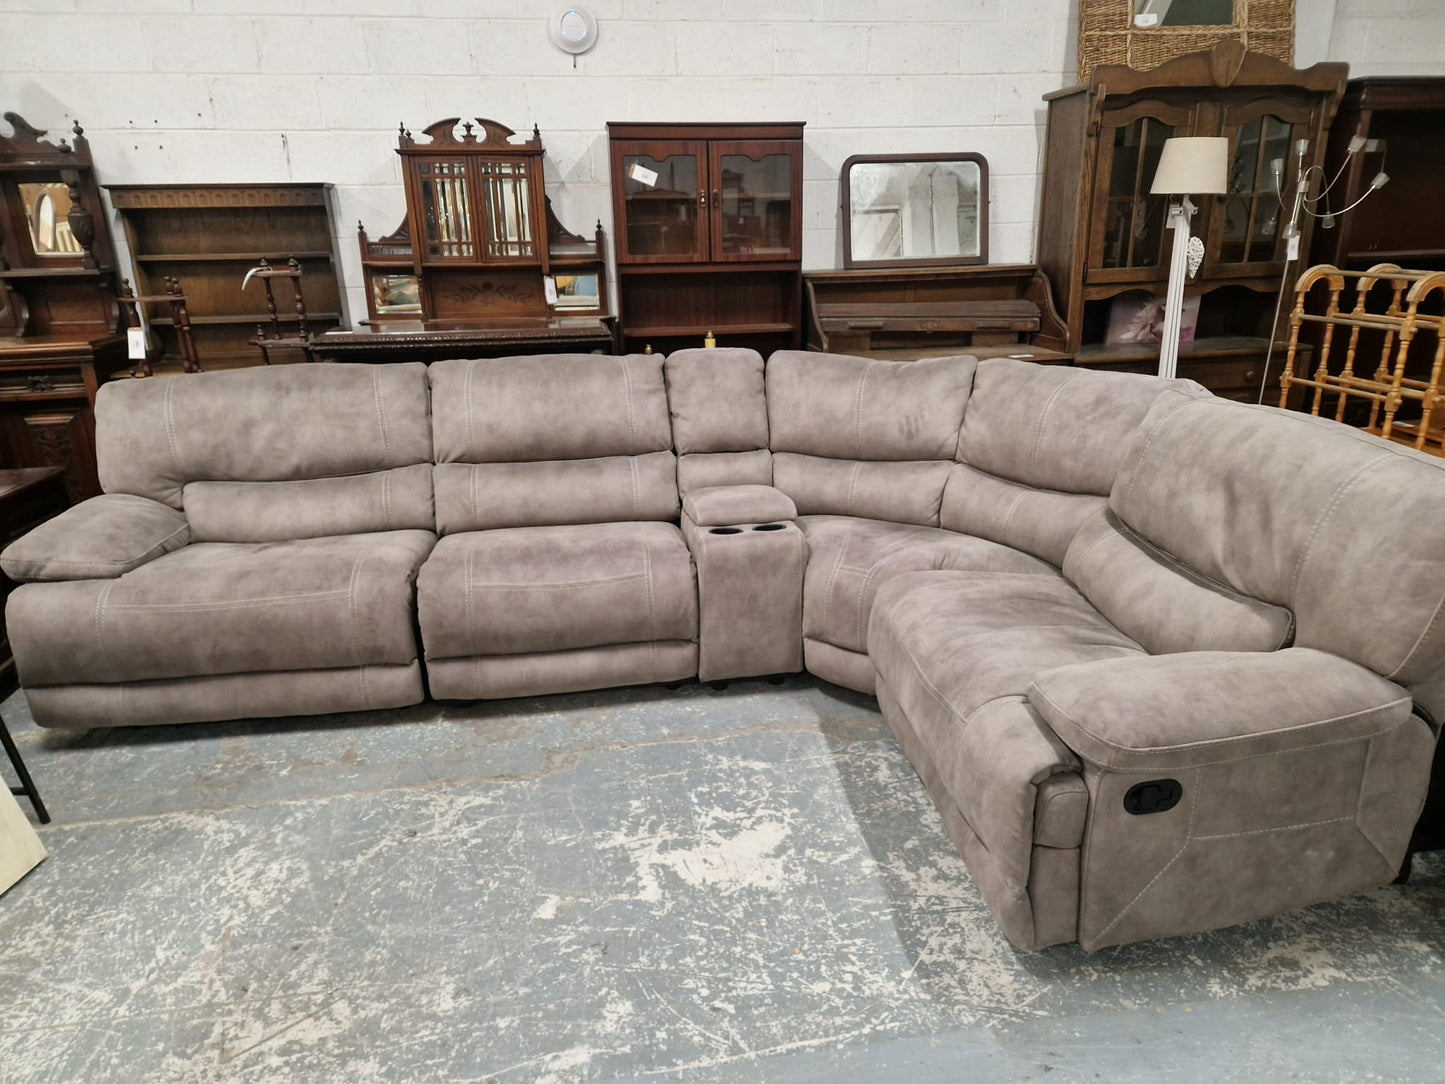 L shaped large sectional FABRIC recliner corner suite with storage and drinks holder